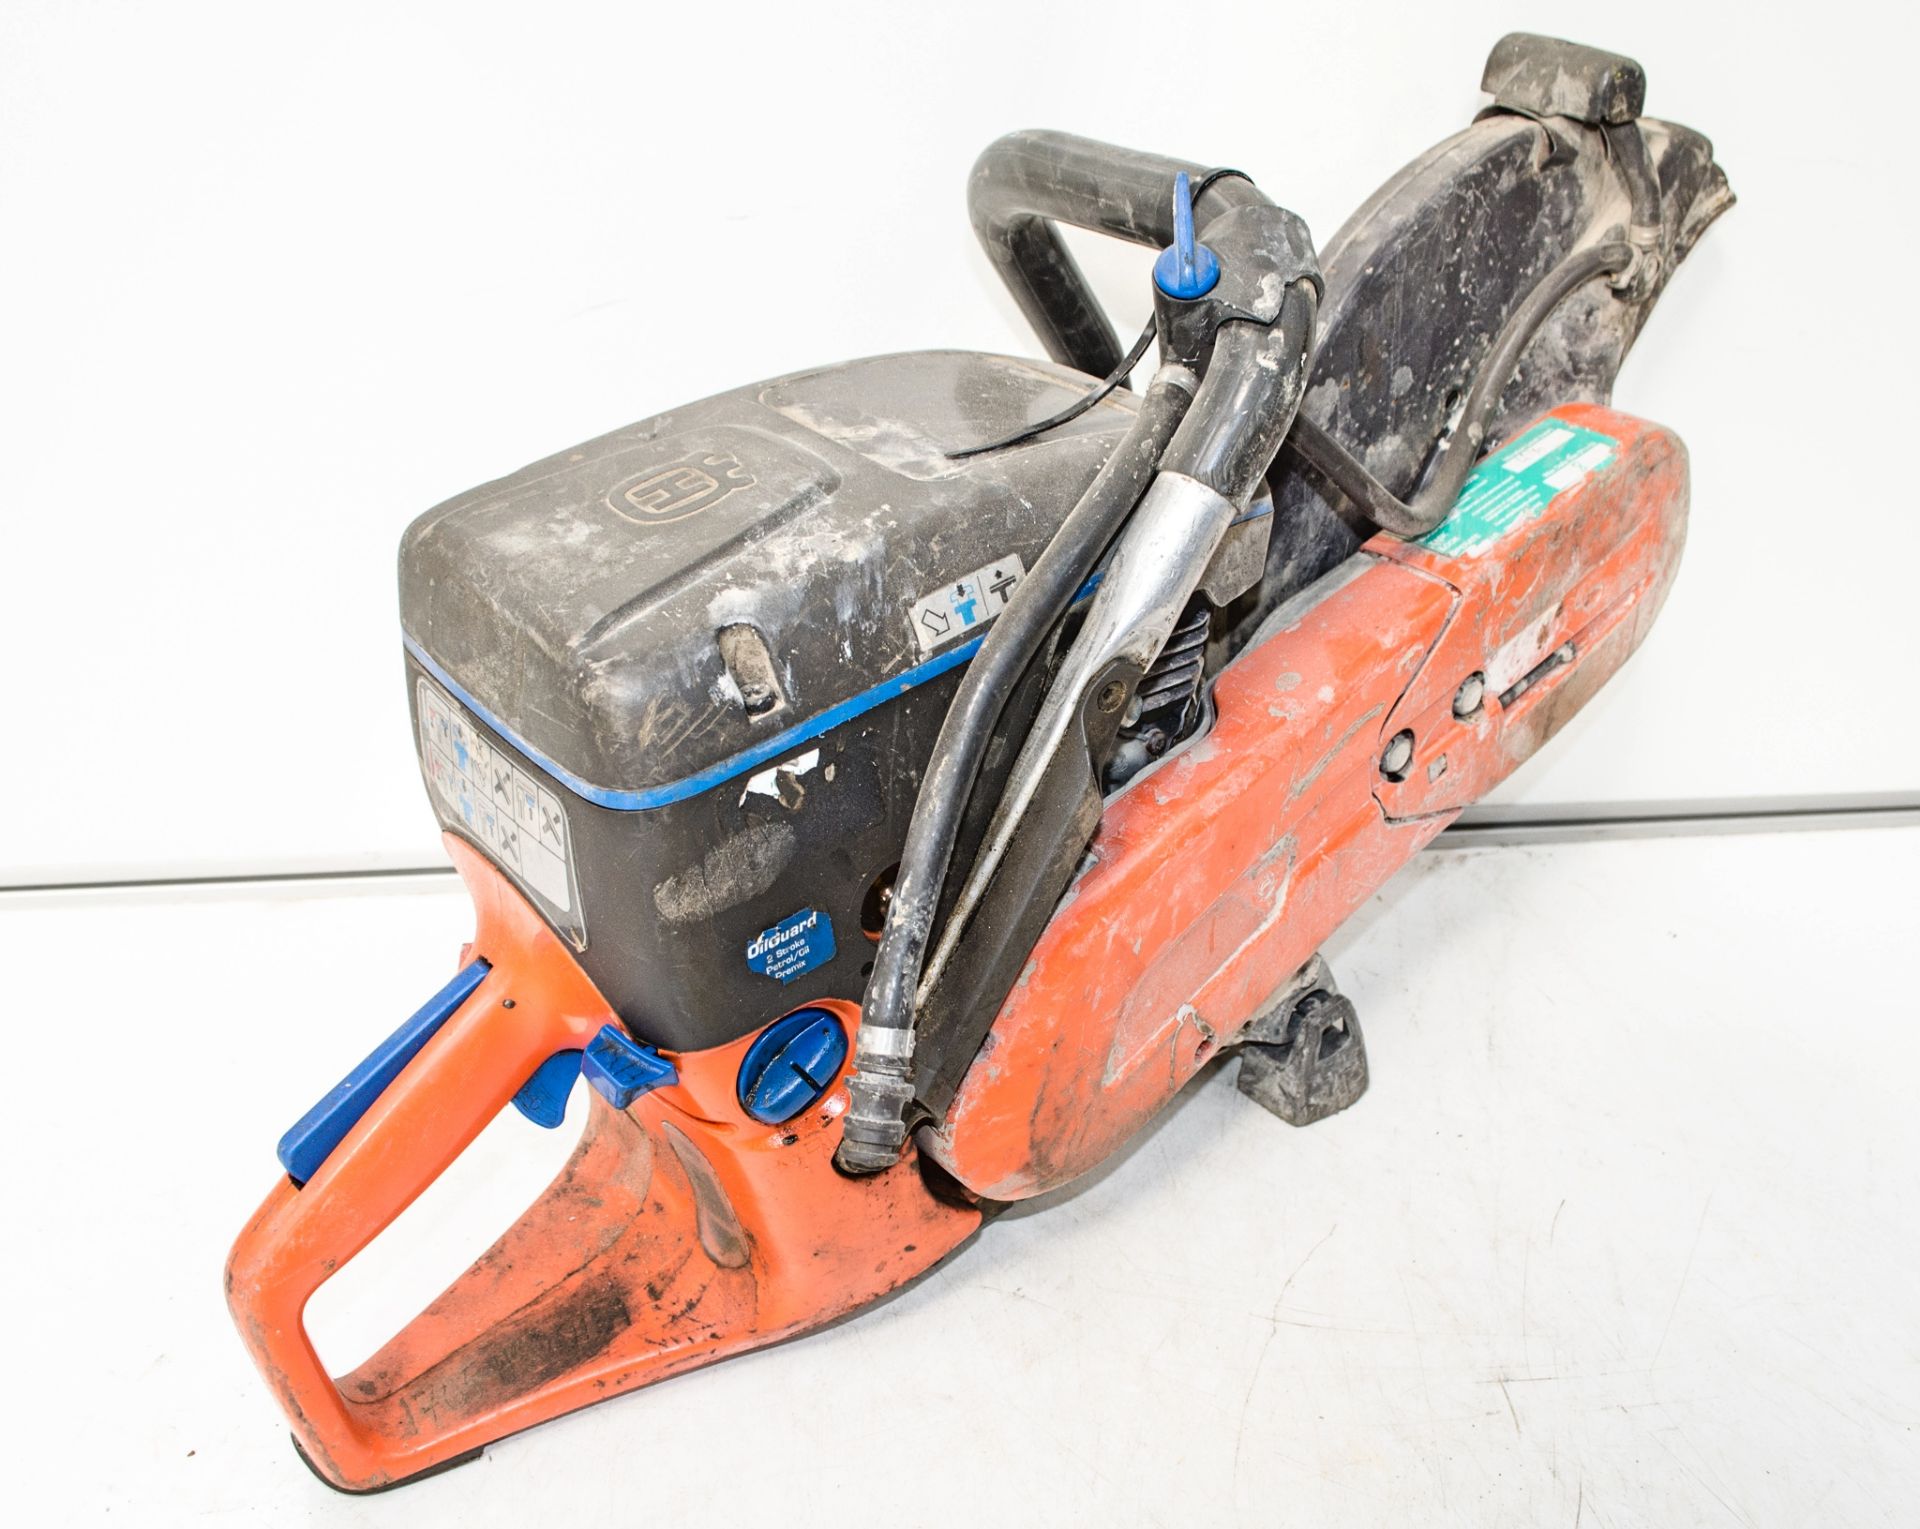 Husqvarna K760 petrol driven cut off saw ** Pull cord assembly and cover missing ** 1705HSQ0159 - Image 2 of 2